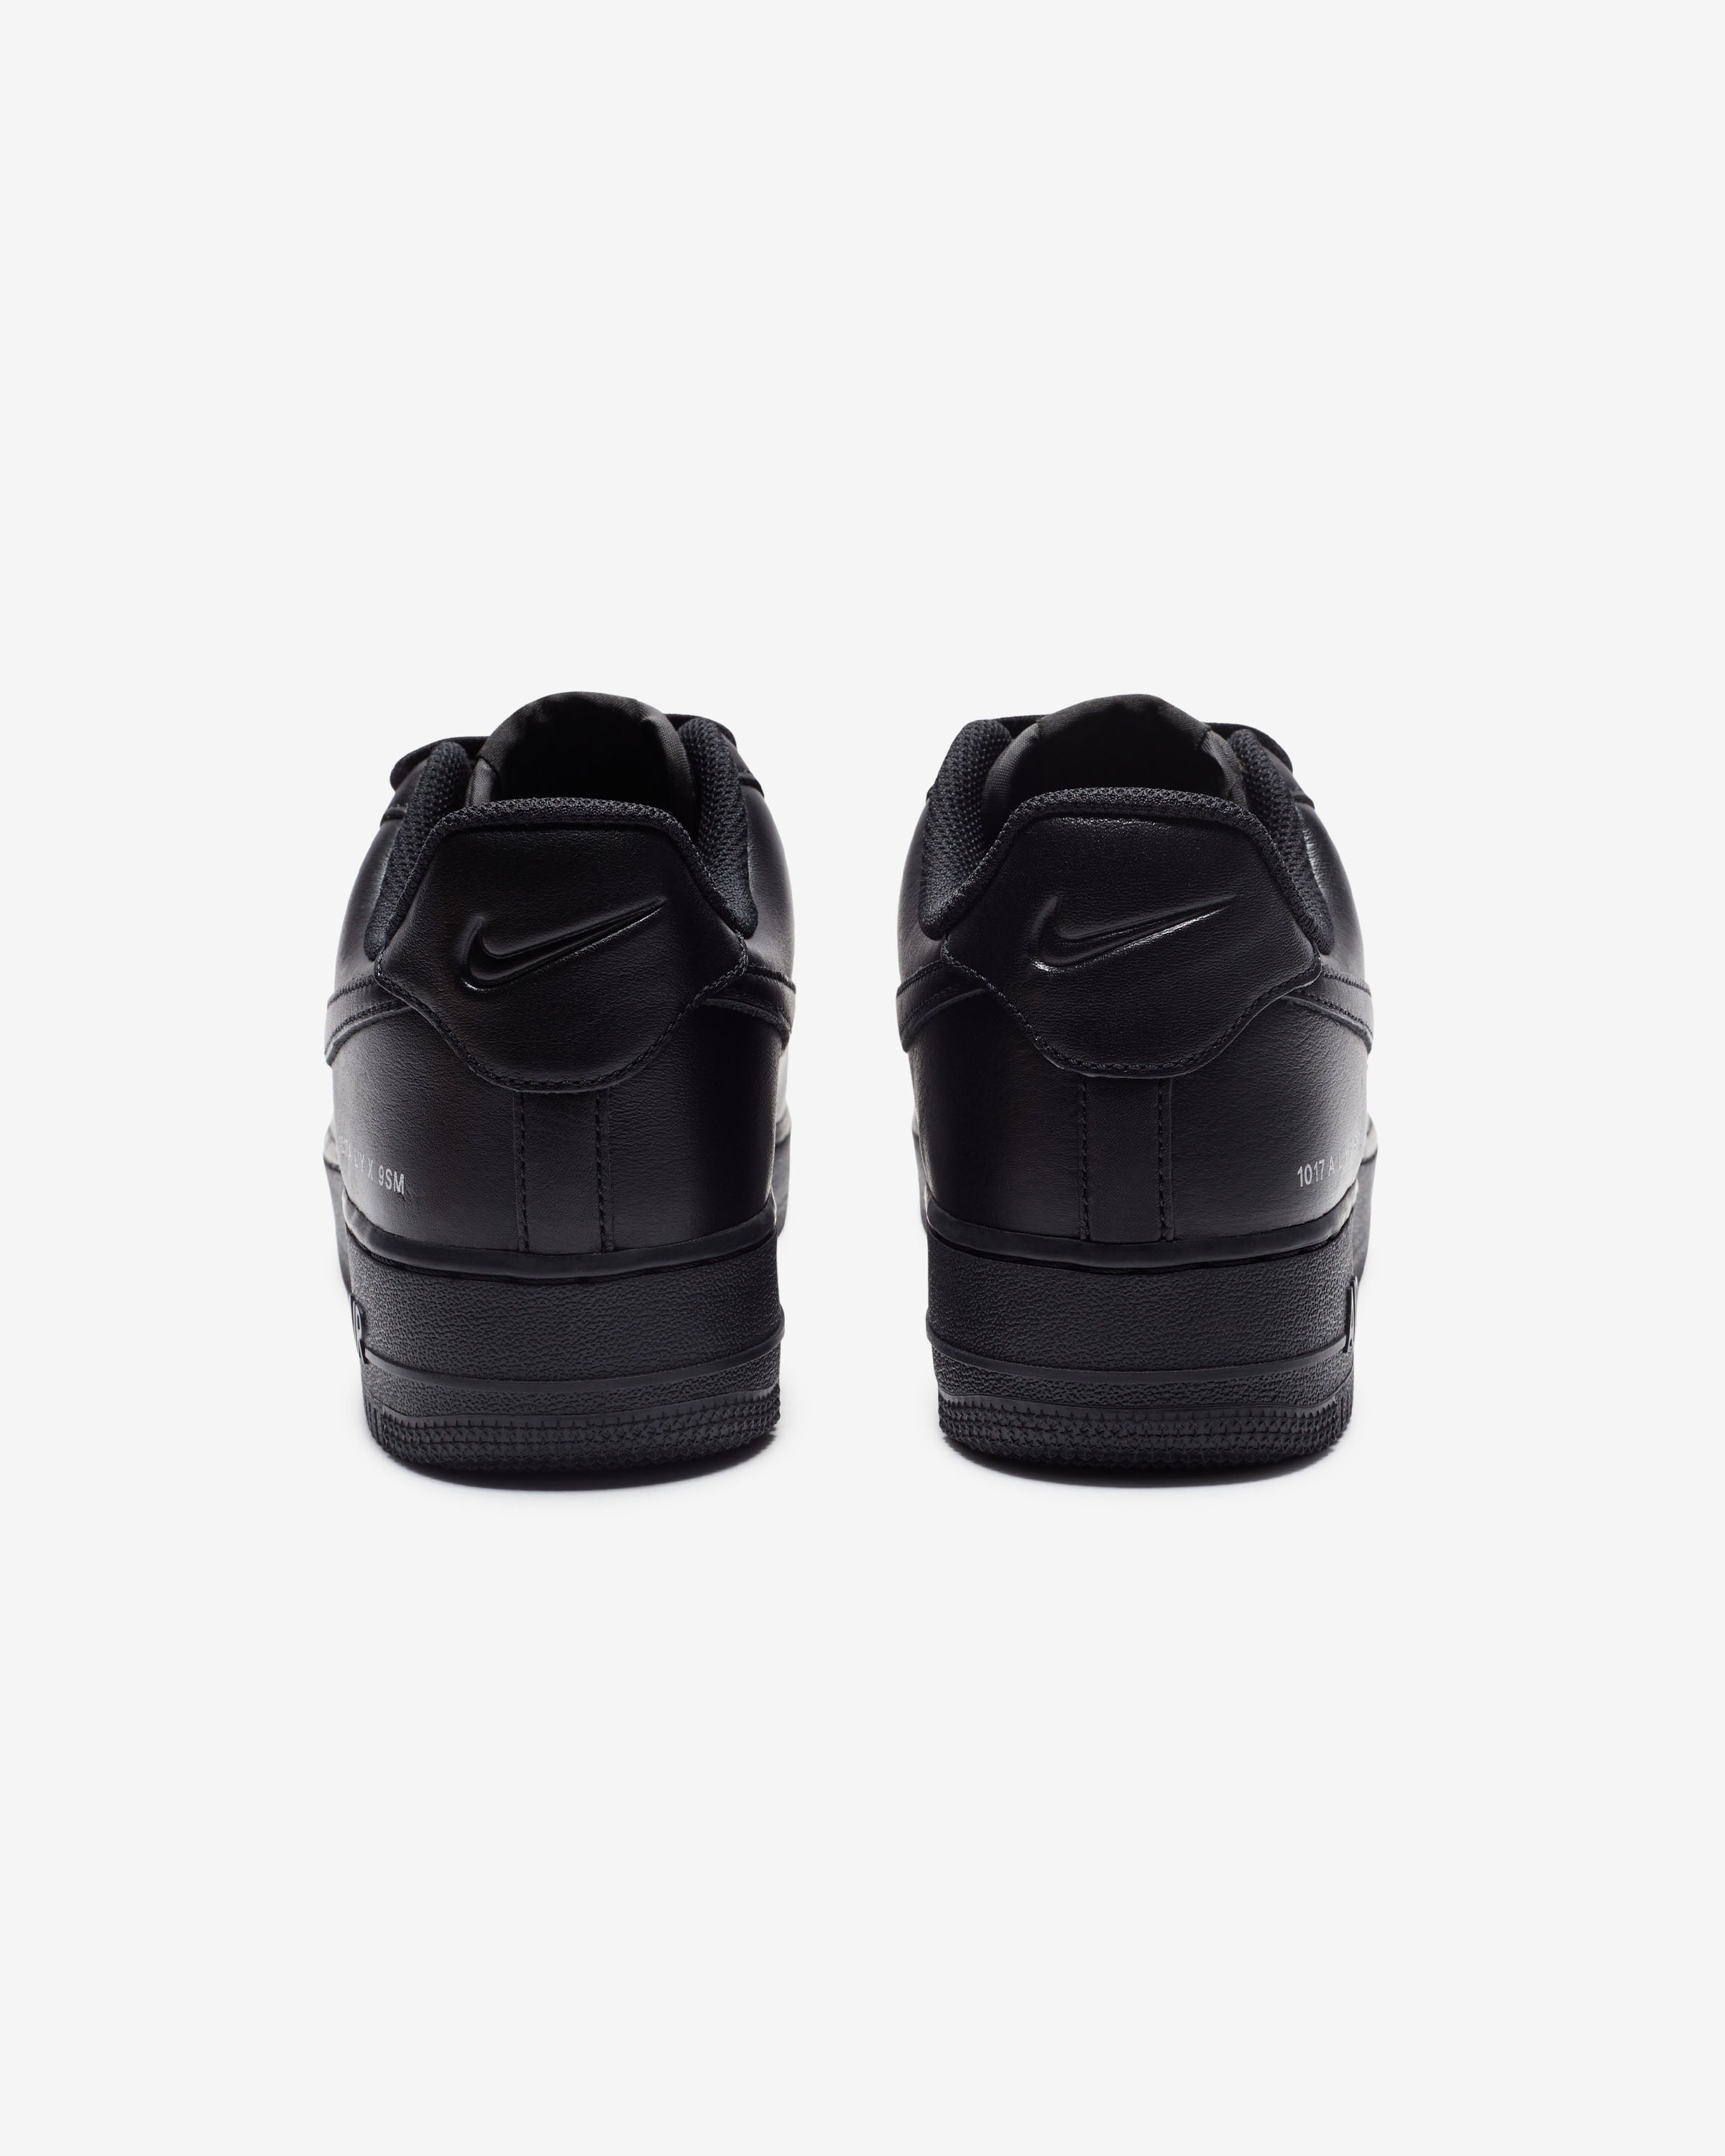 NIKE X ALYX 1017 AIR FORCE 1 SP - BLACK – Undefeated